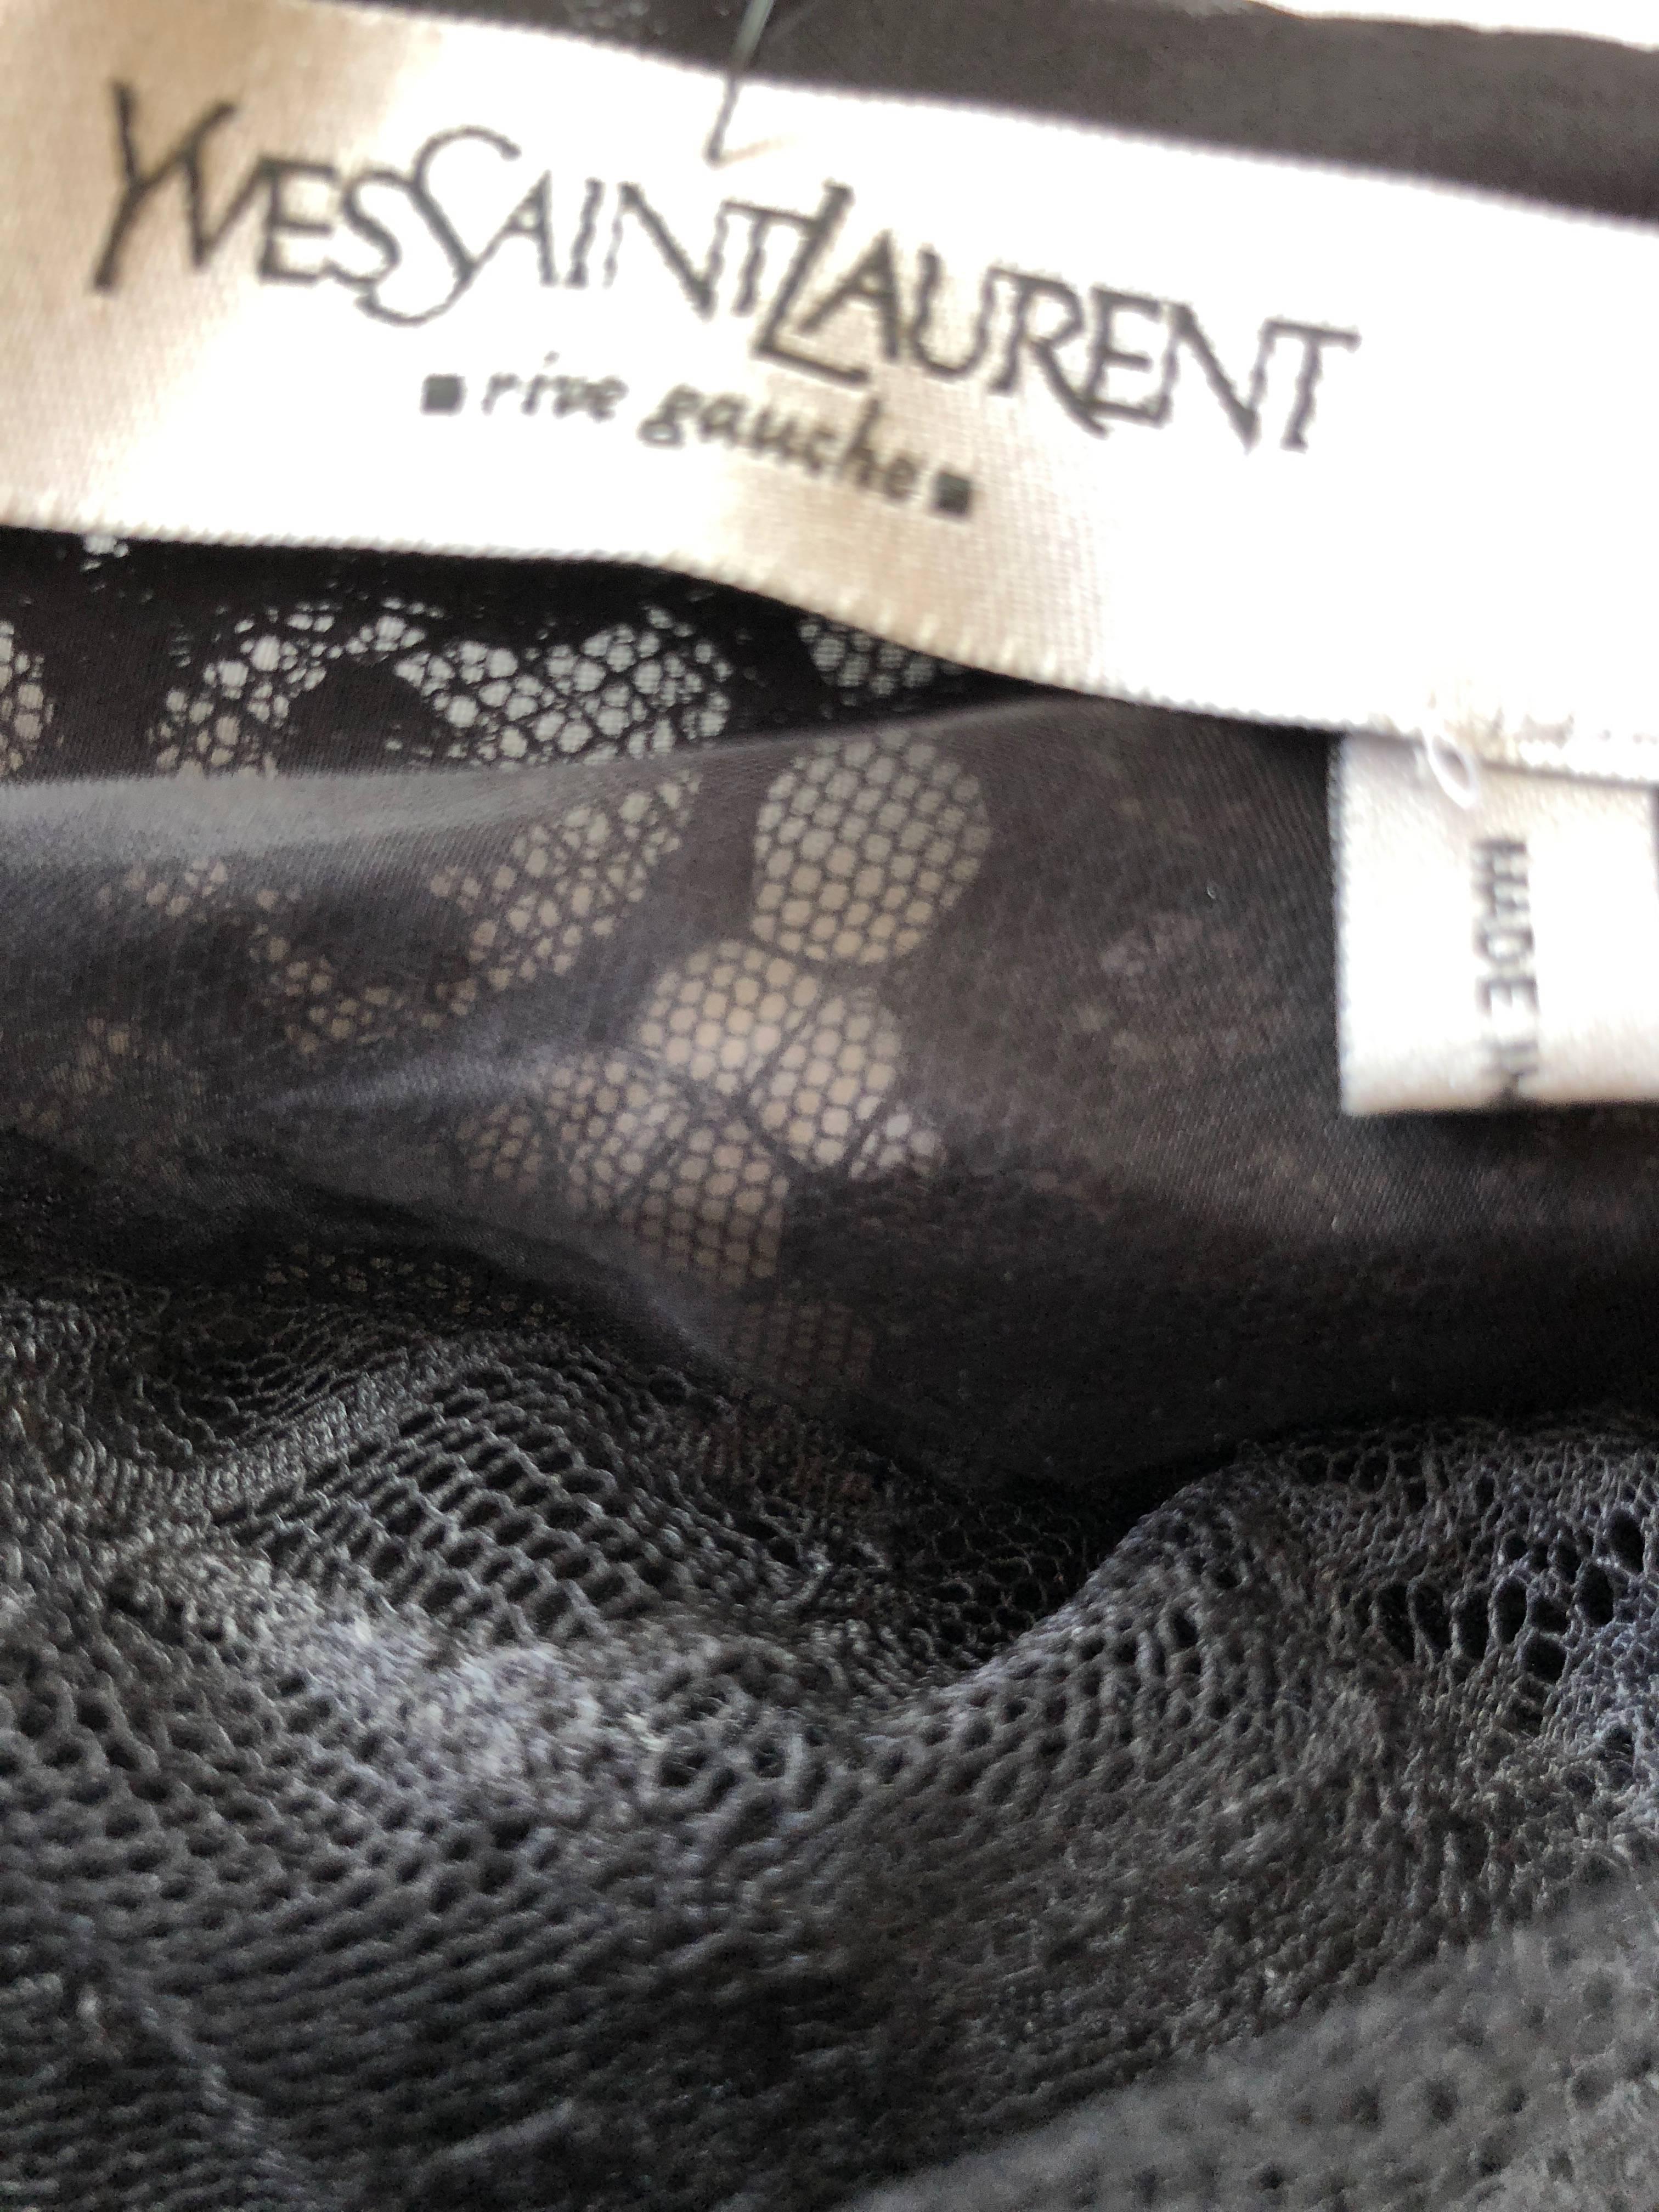 Yves Saint Laurent by Tom Ford Black Lace Cocktail Dress with Scarf Ties For Sale 7